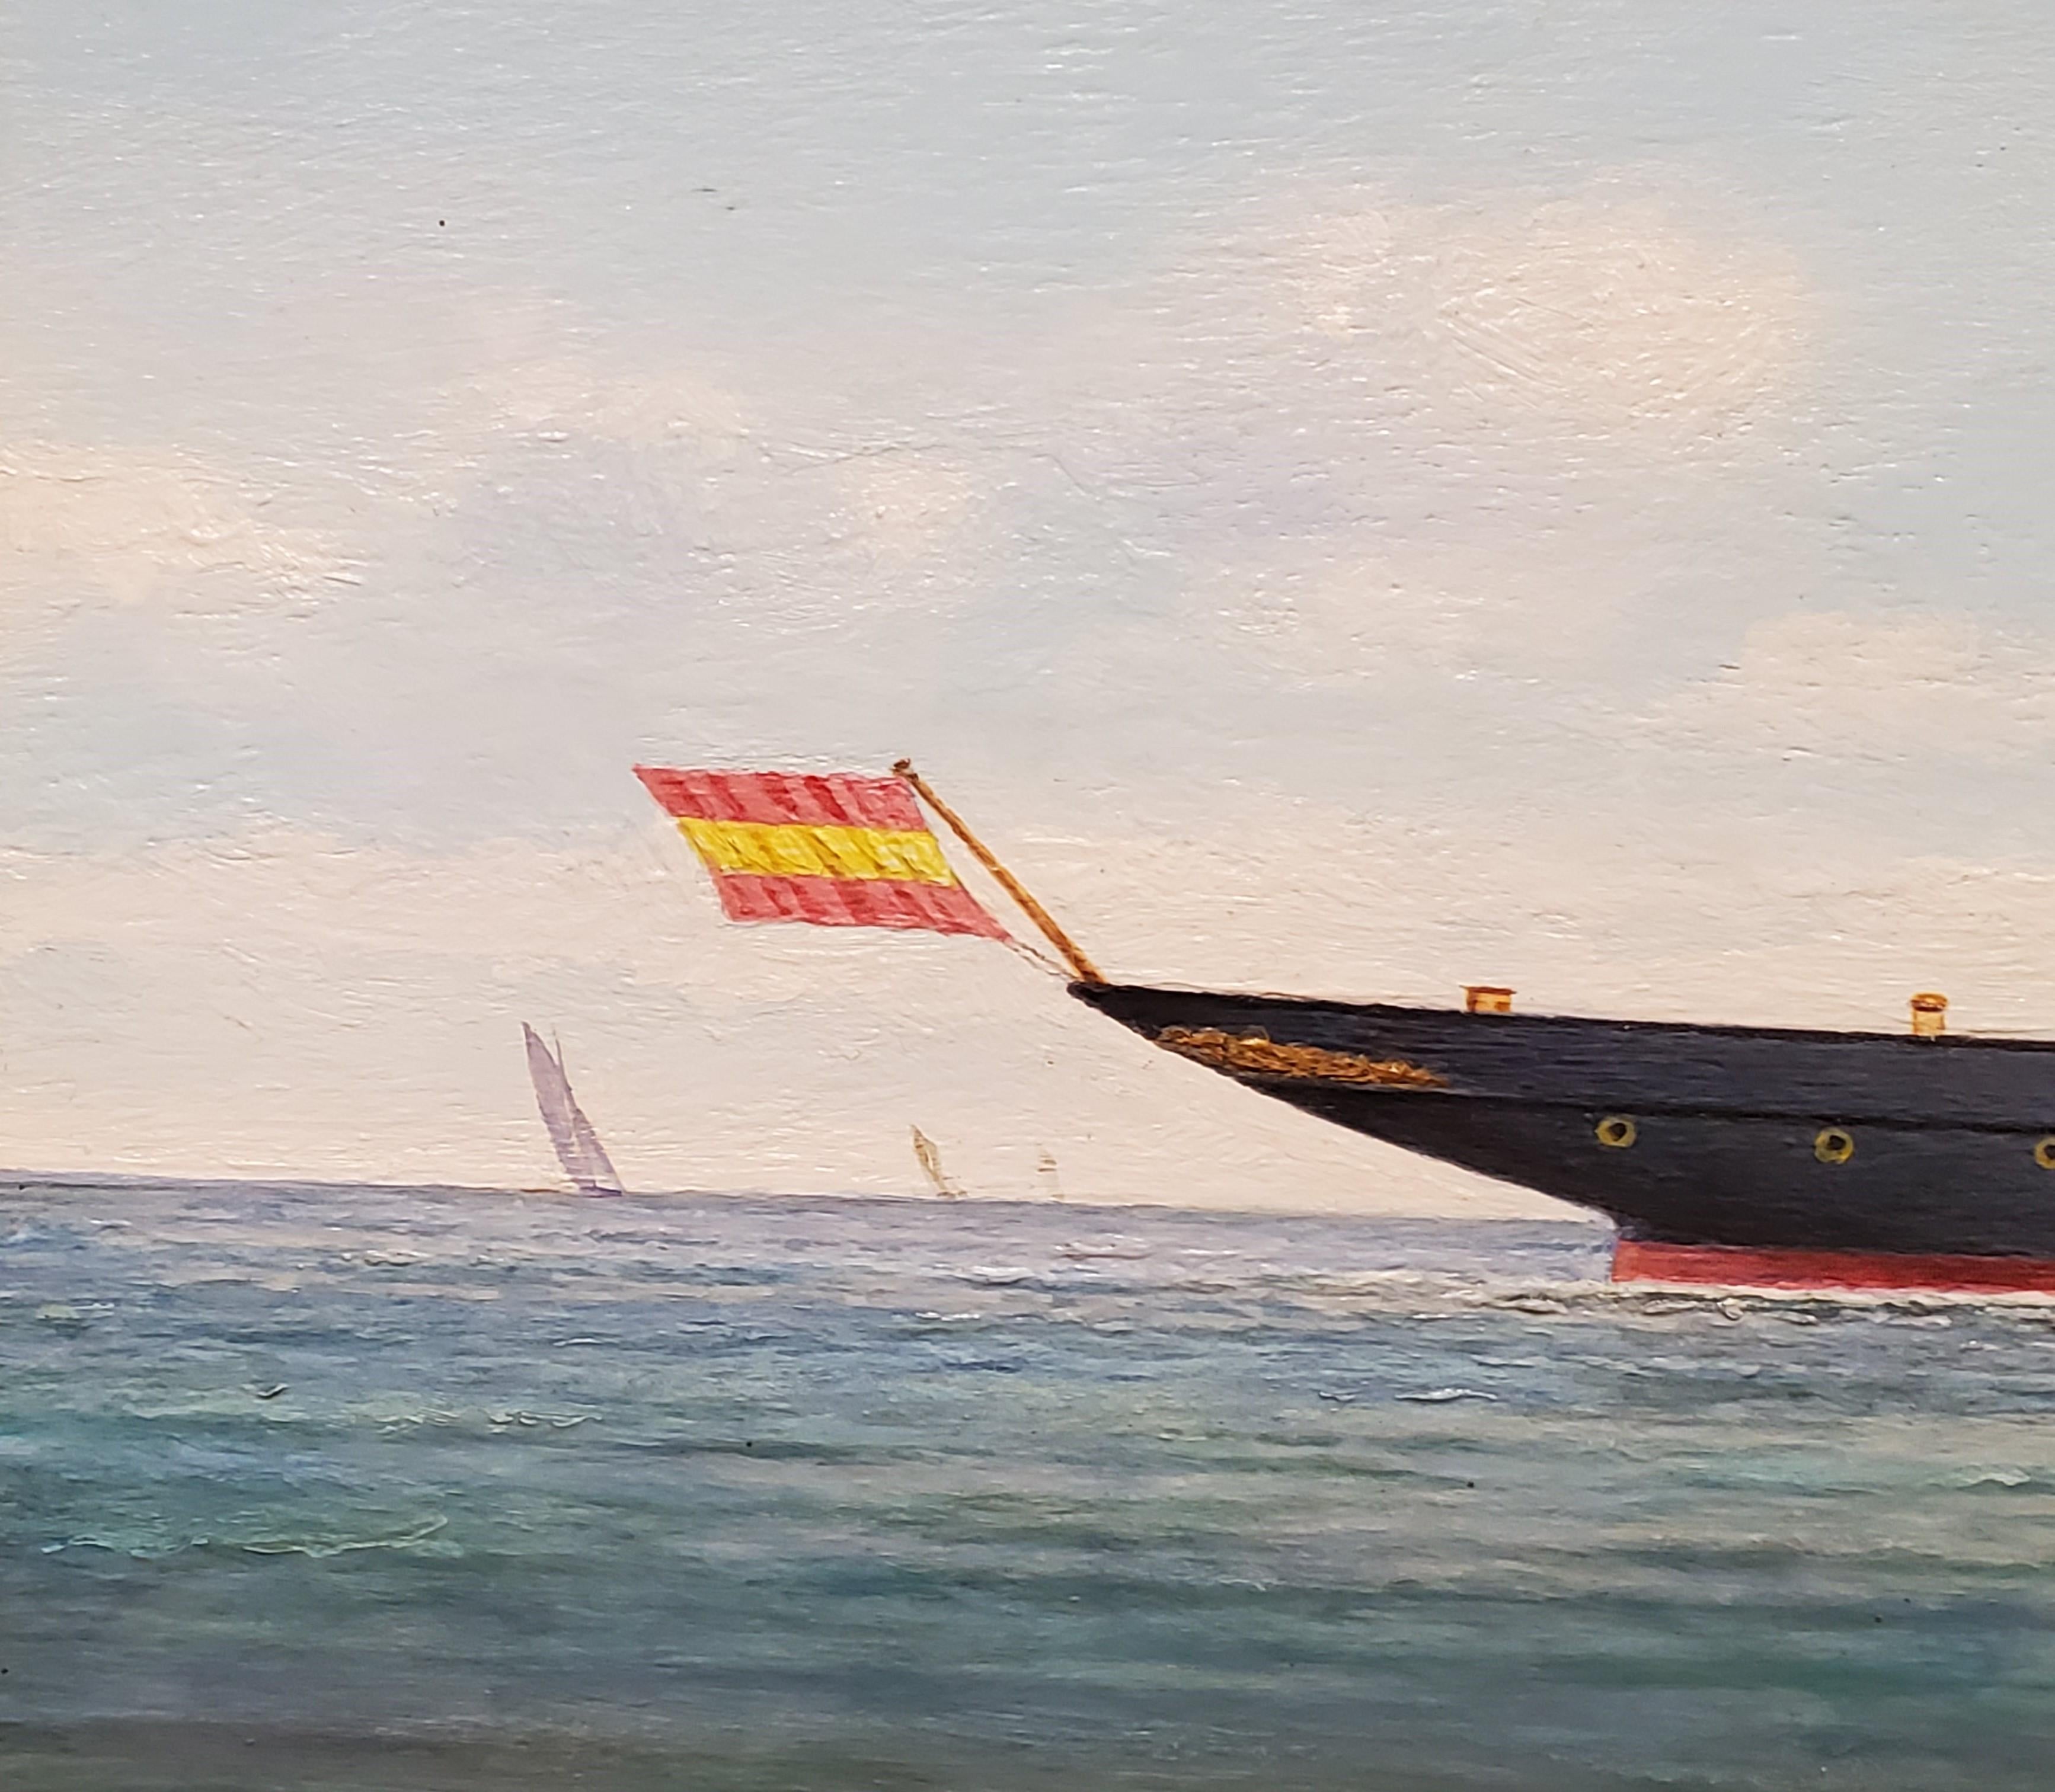 Steam Yacht Viento Justo at Puerto Rico as it was seen in 1923. British born artist Graham Flight paintged this work about 1980 in a skilled anachronistic way

This landscape nautical painting is oil on wood and measures 20 inches tall by 28 inches